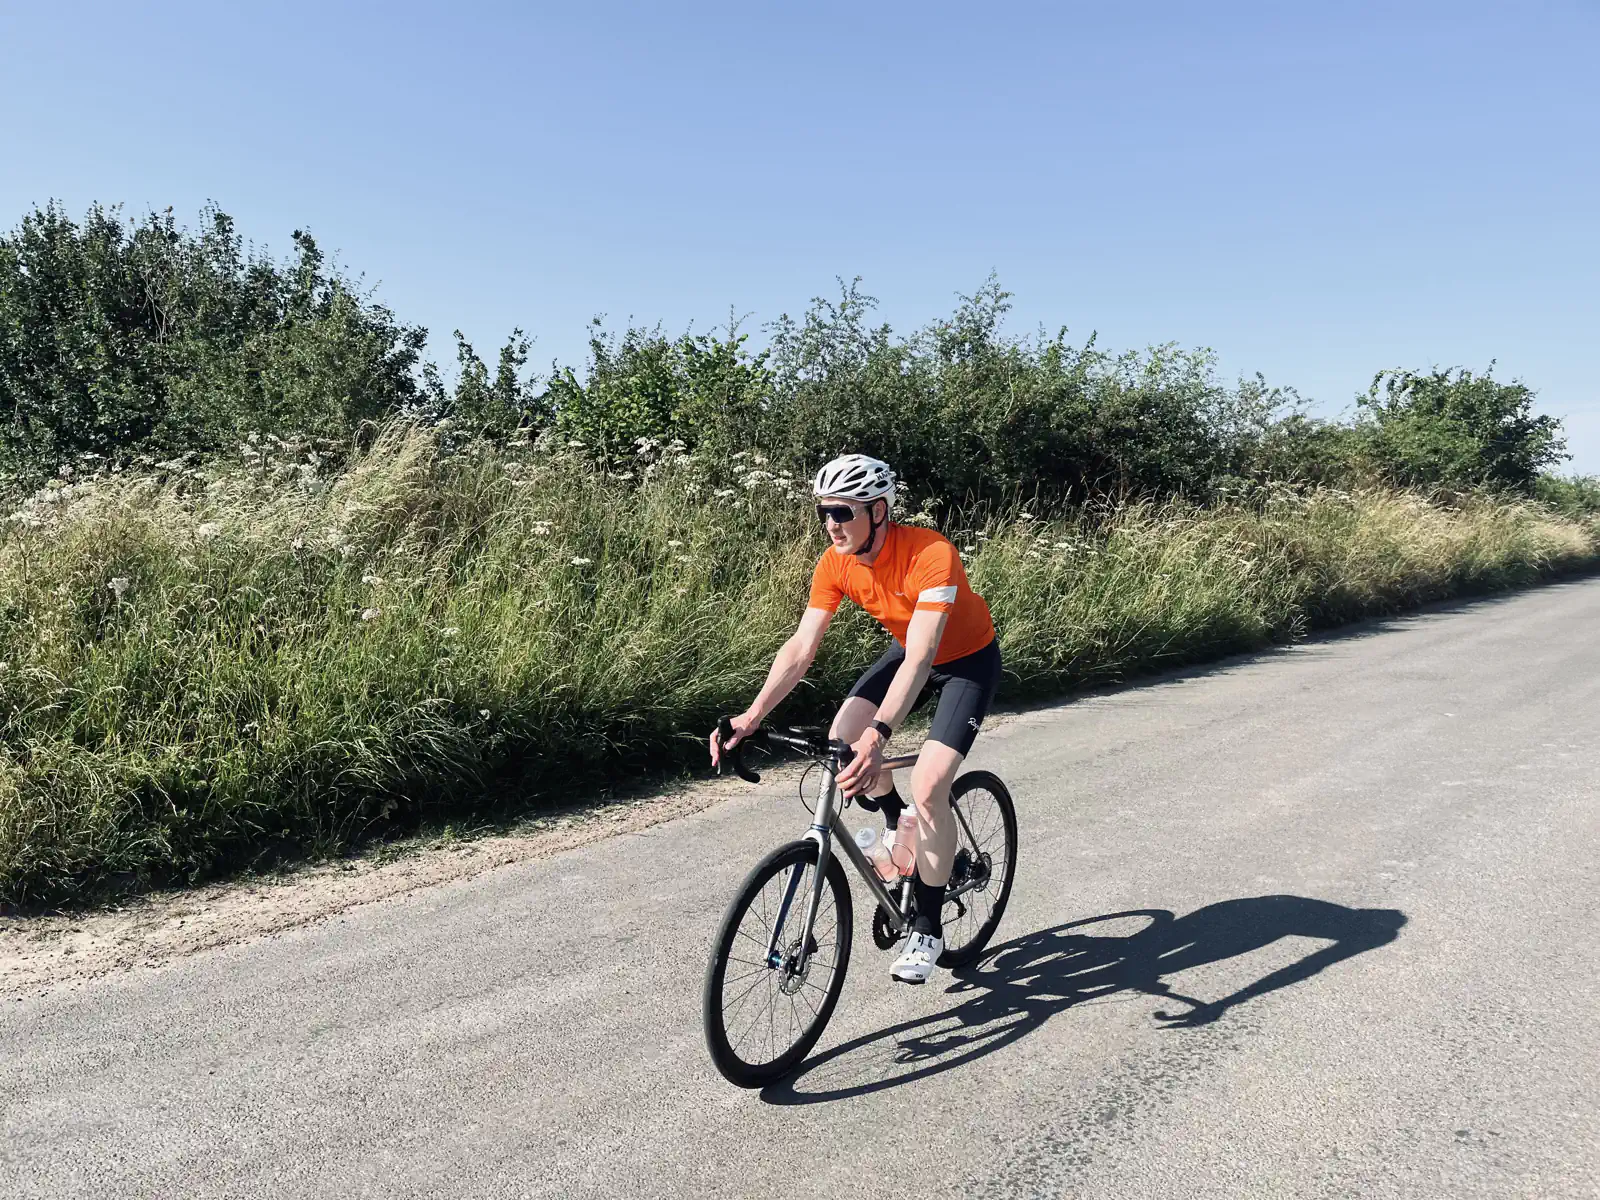 Cyclist in orange jersey riding on a sunny country road